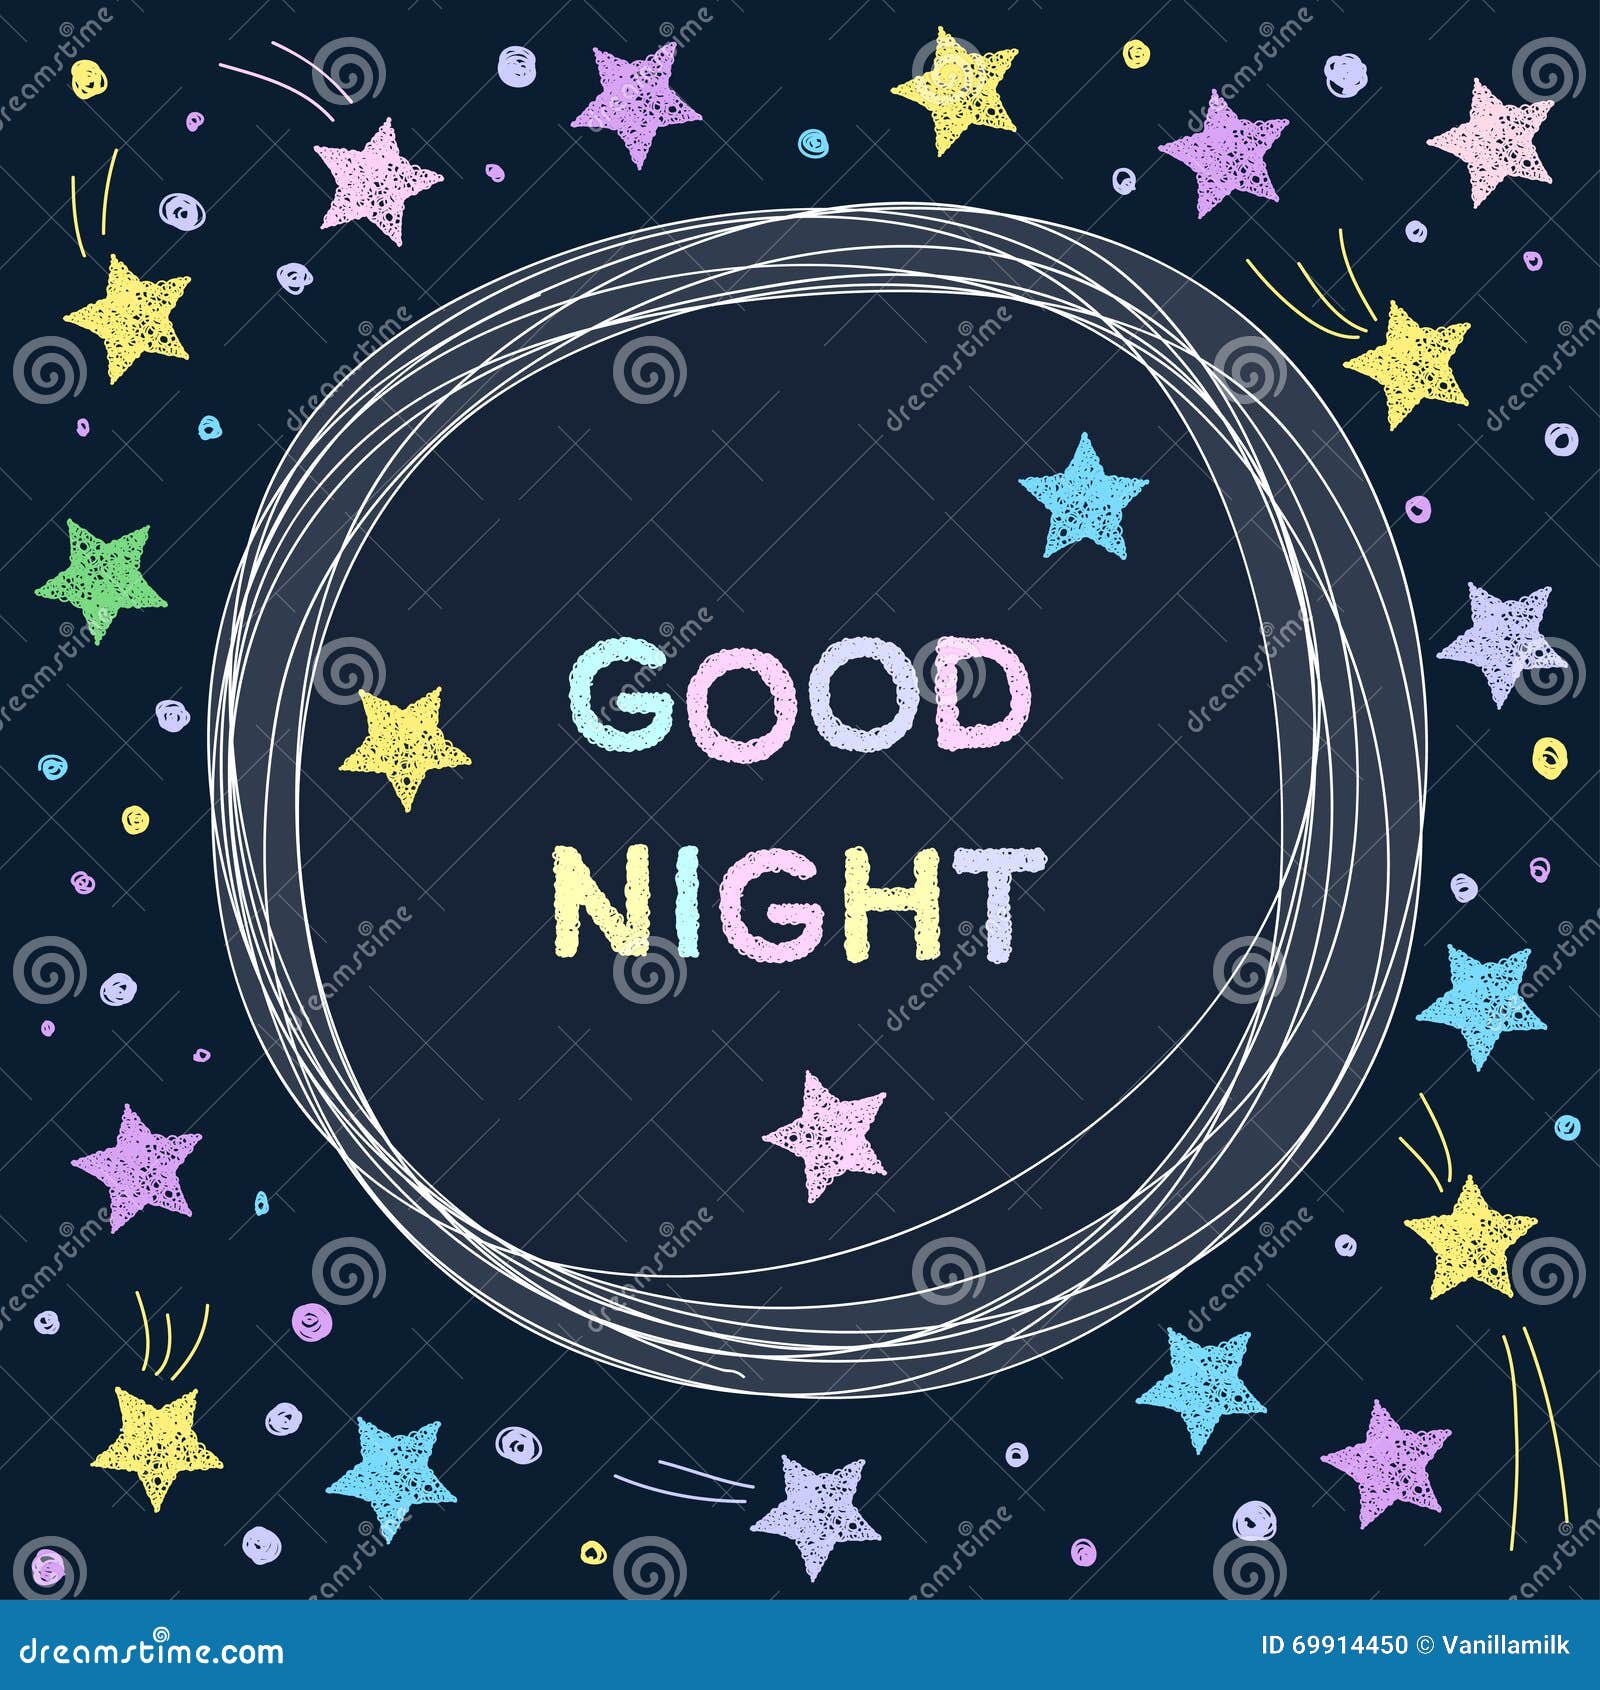 Doodle Good Night Card Background Template. Stock Vector ...